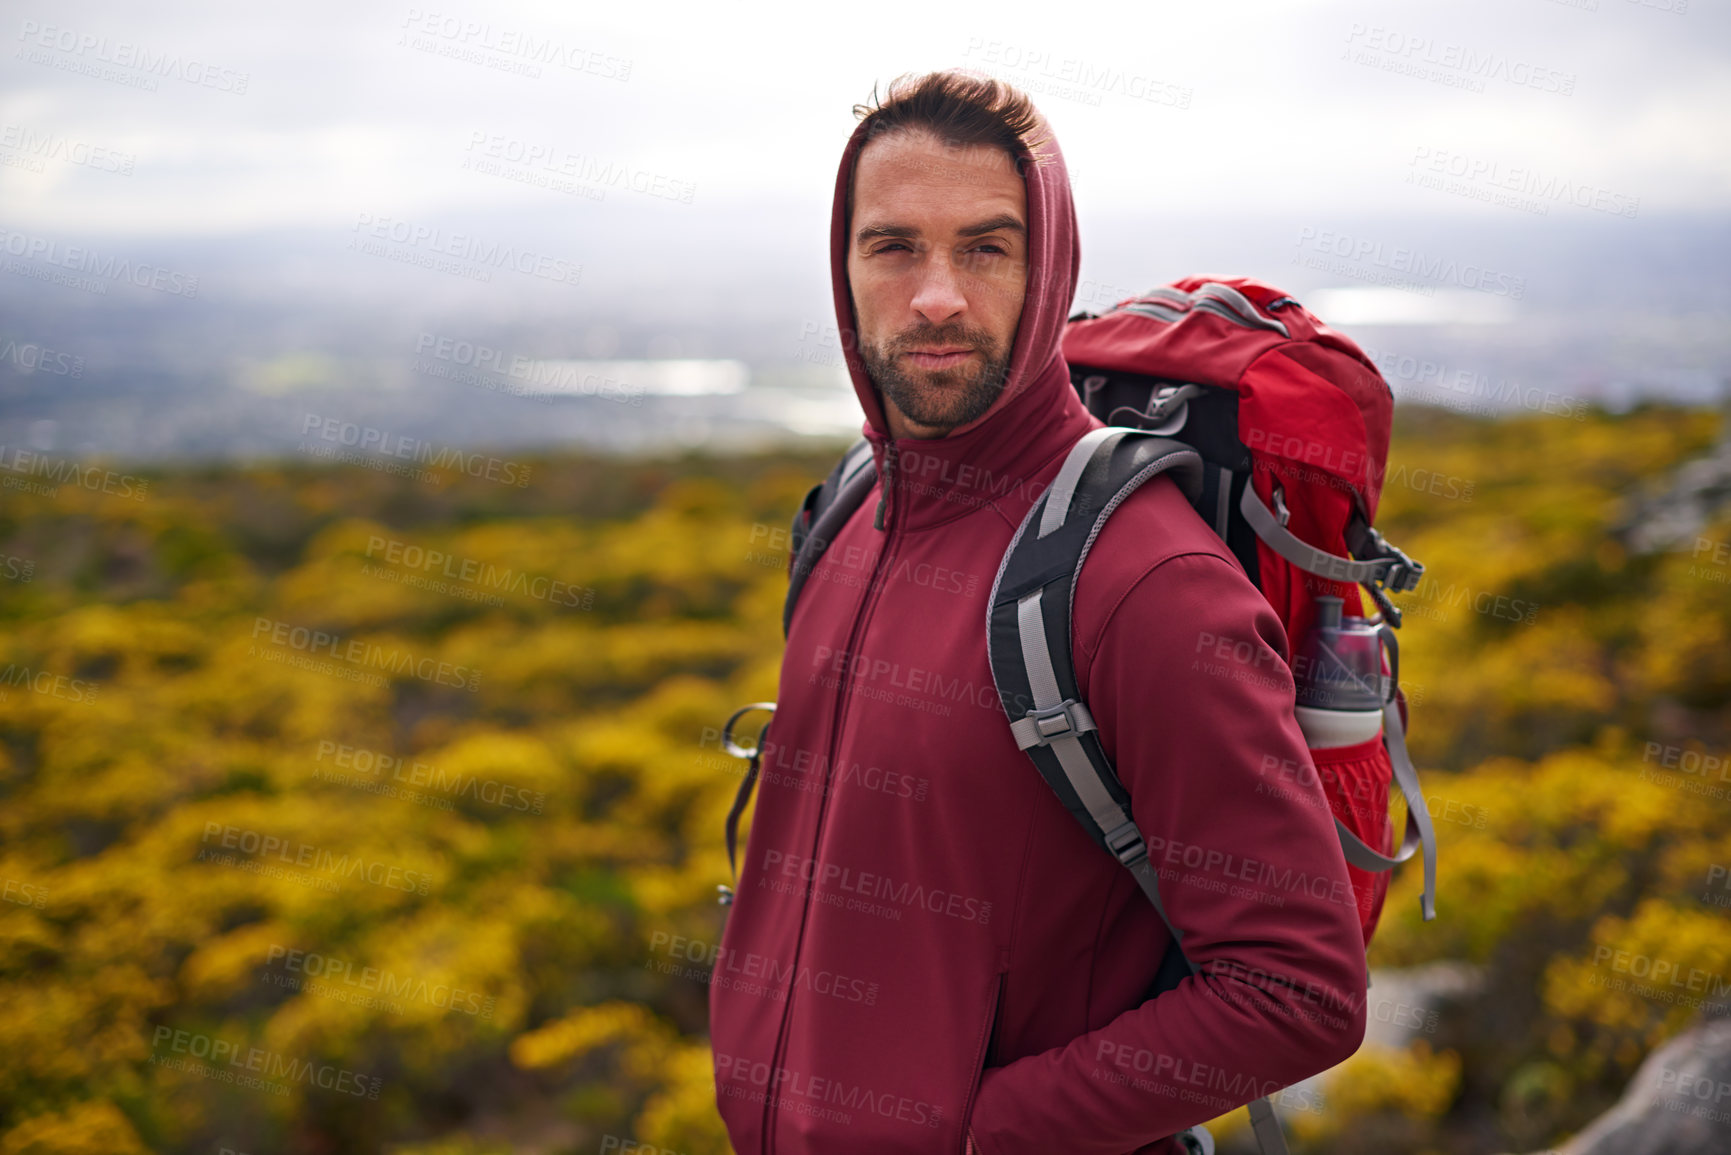 Buy stock photo Hiking, serious and face of man on mountain, nature and rock for outdoor adventure with vision. Male person, athlete or sport in environment for exercise, fitness or health with backpack by landscape